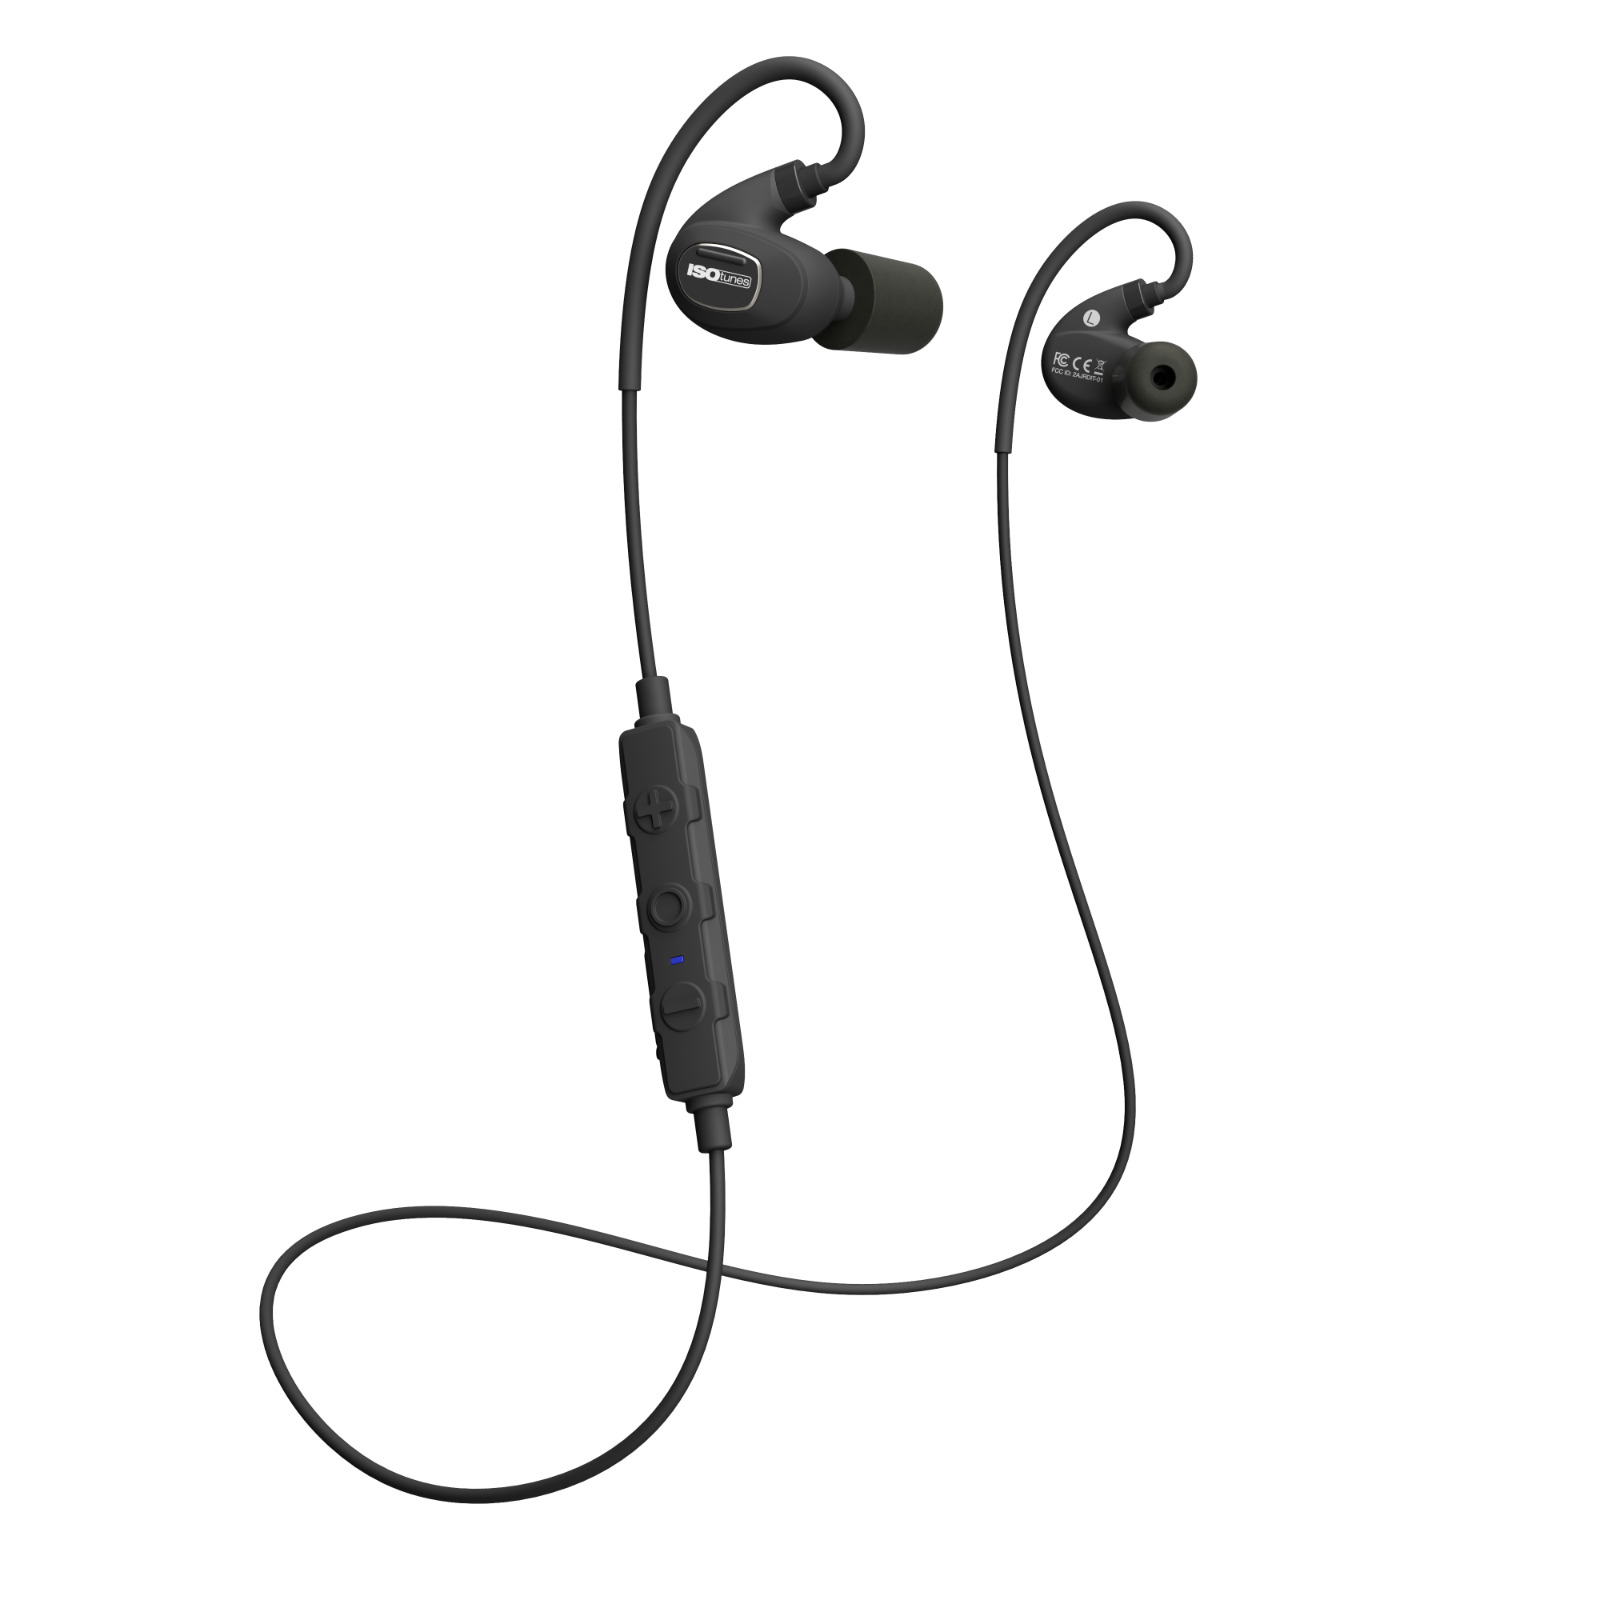 ISOtunes PRO 2.0 - Noise Isolating Bluetooth Earbuds, 27 dB NRR, 16 Hour Battery